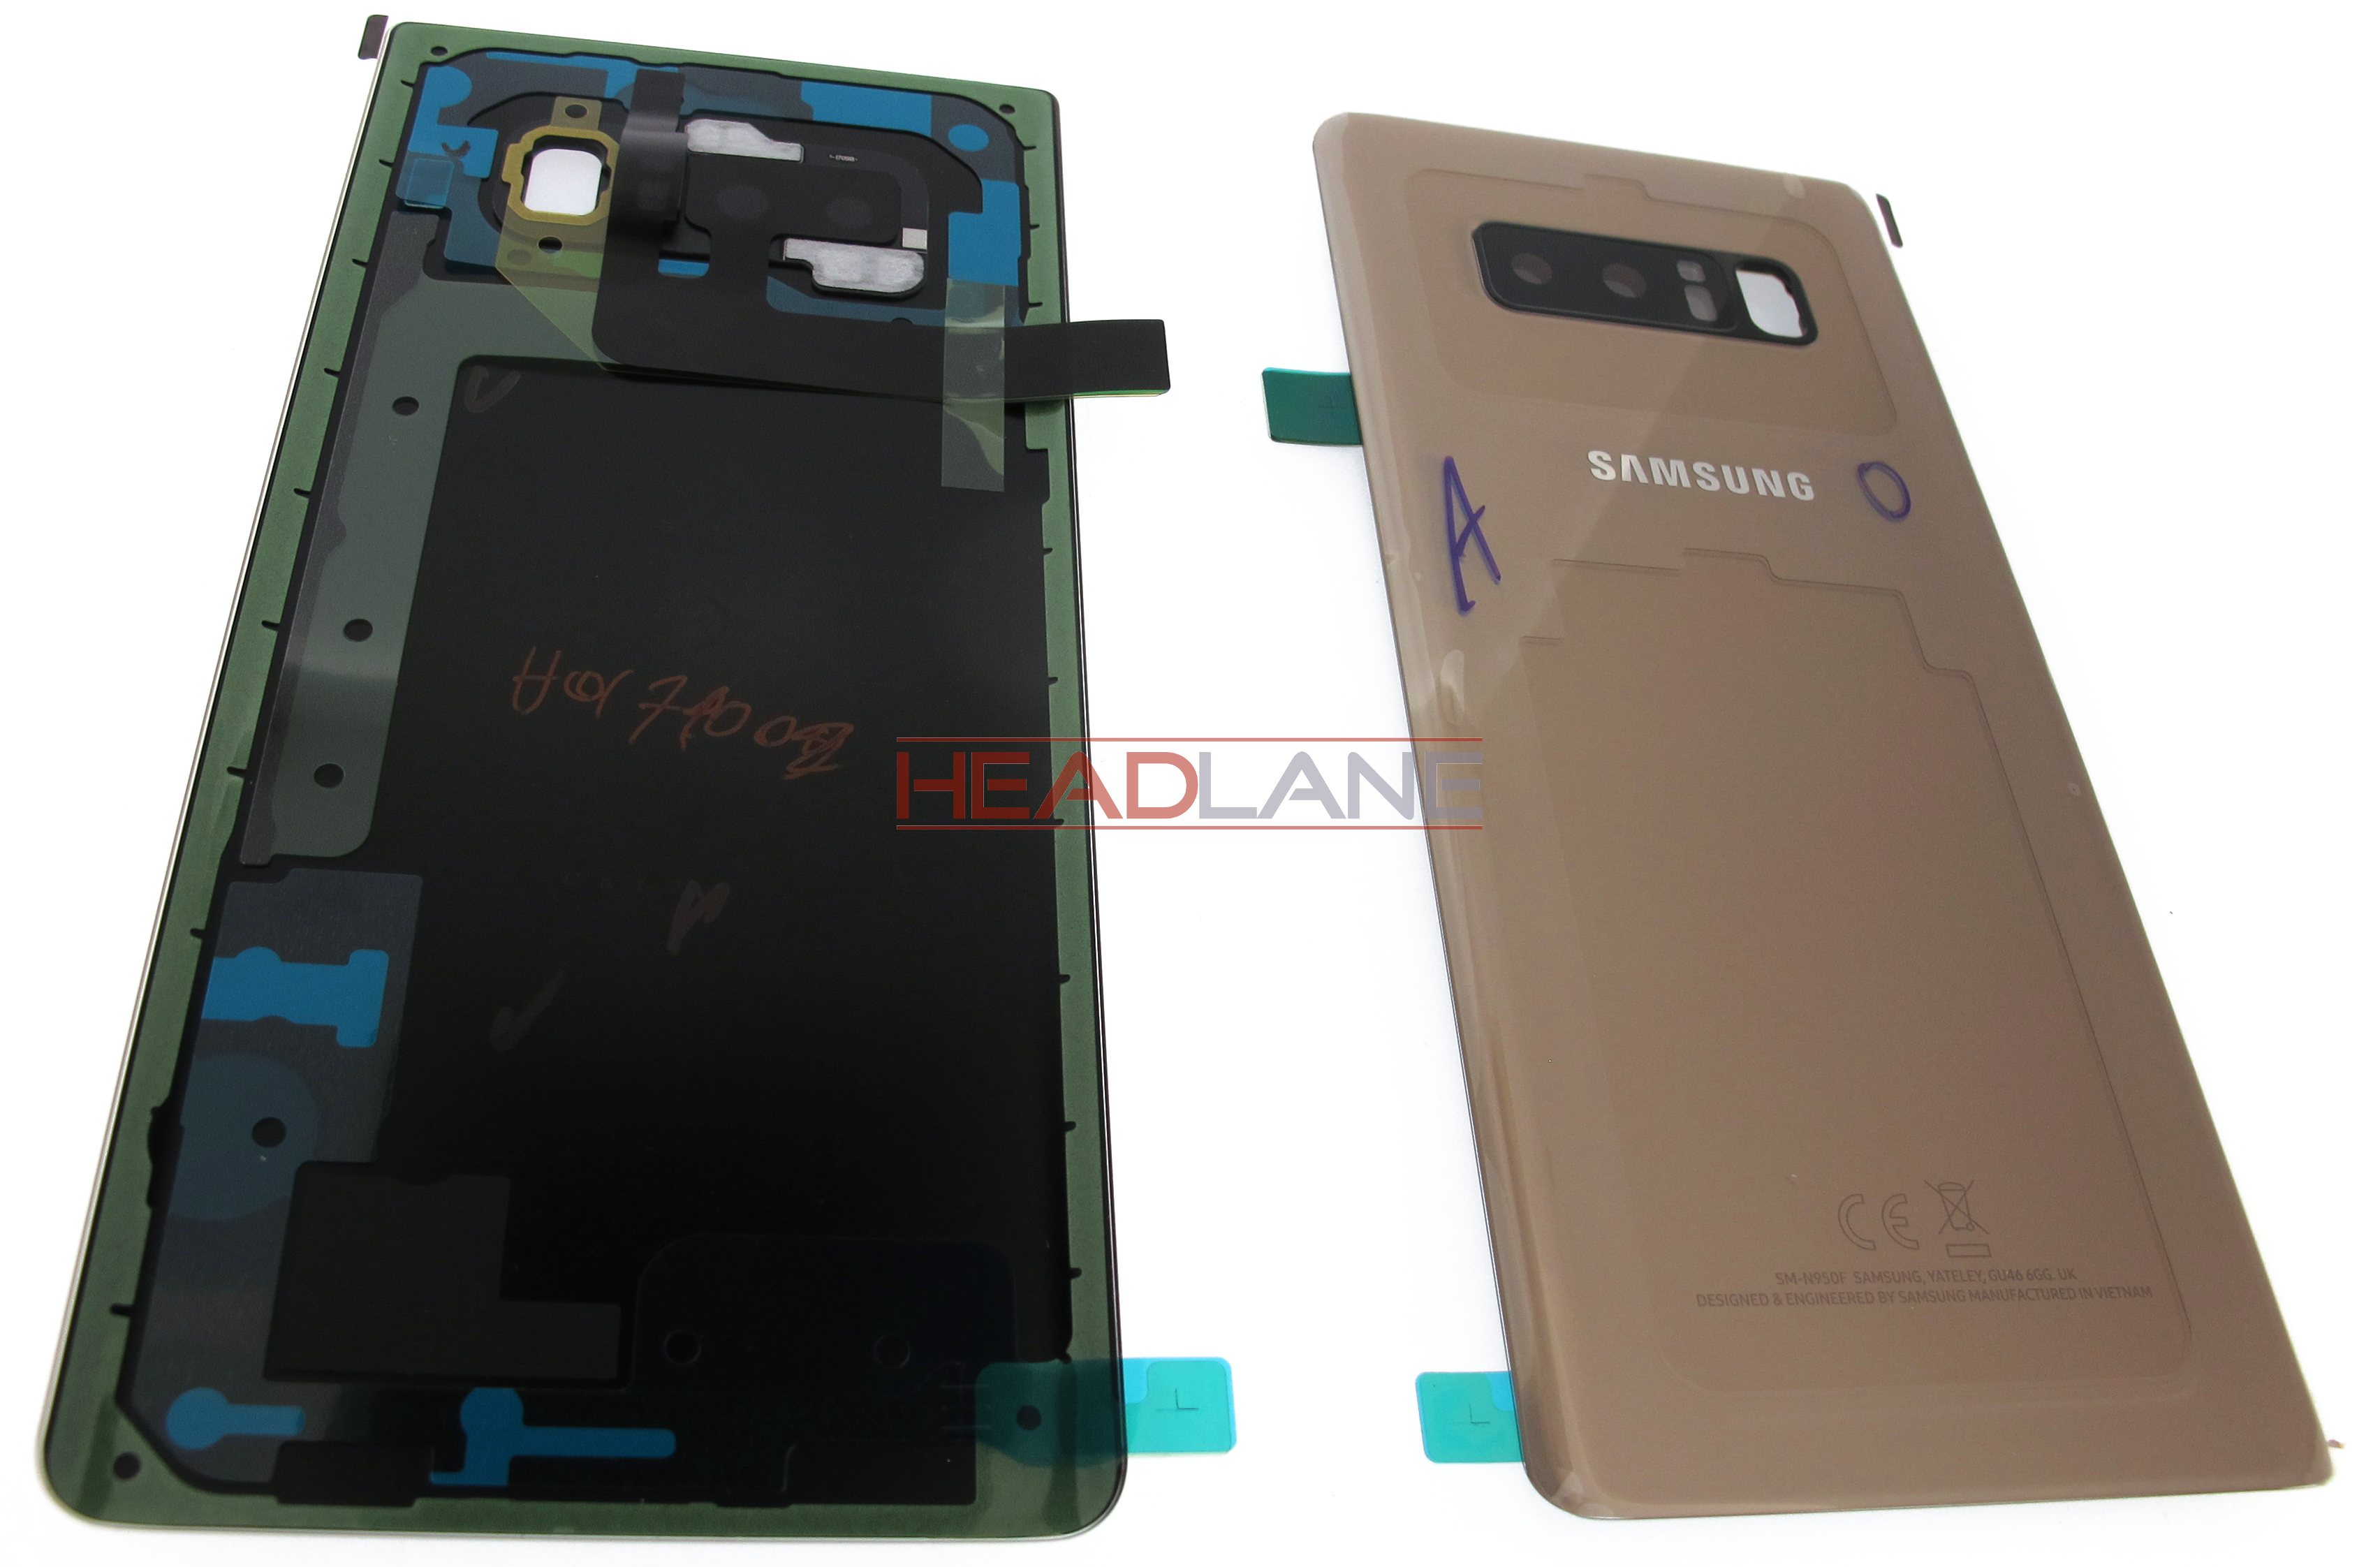 Samsung SM-N950 Galaxy Note 8 Battery Cover - Gold